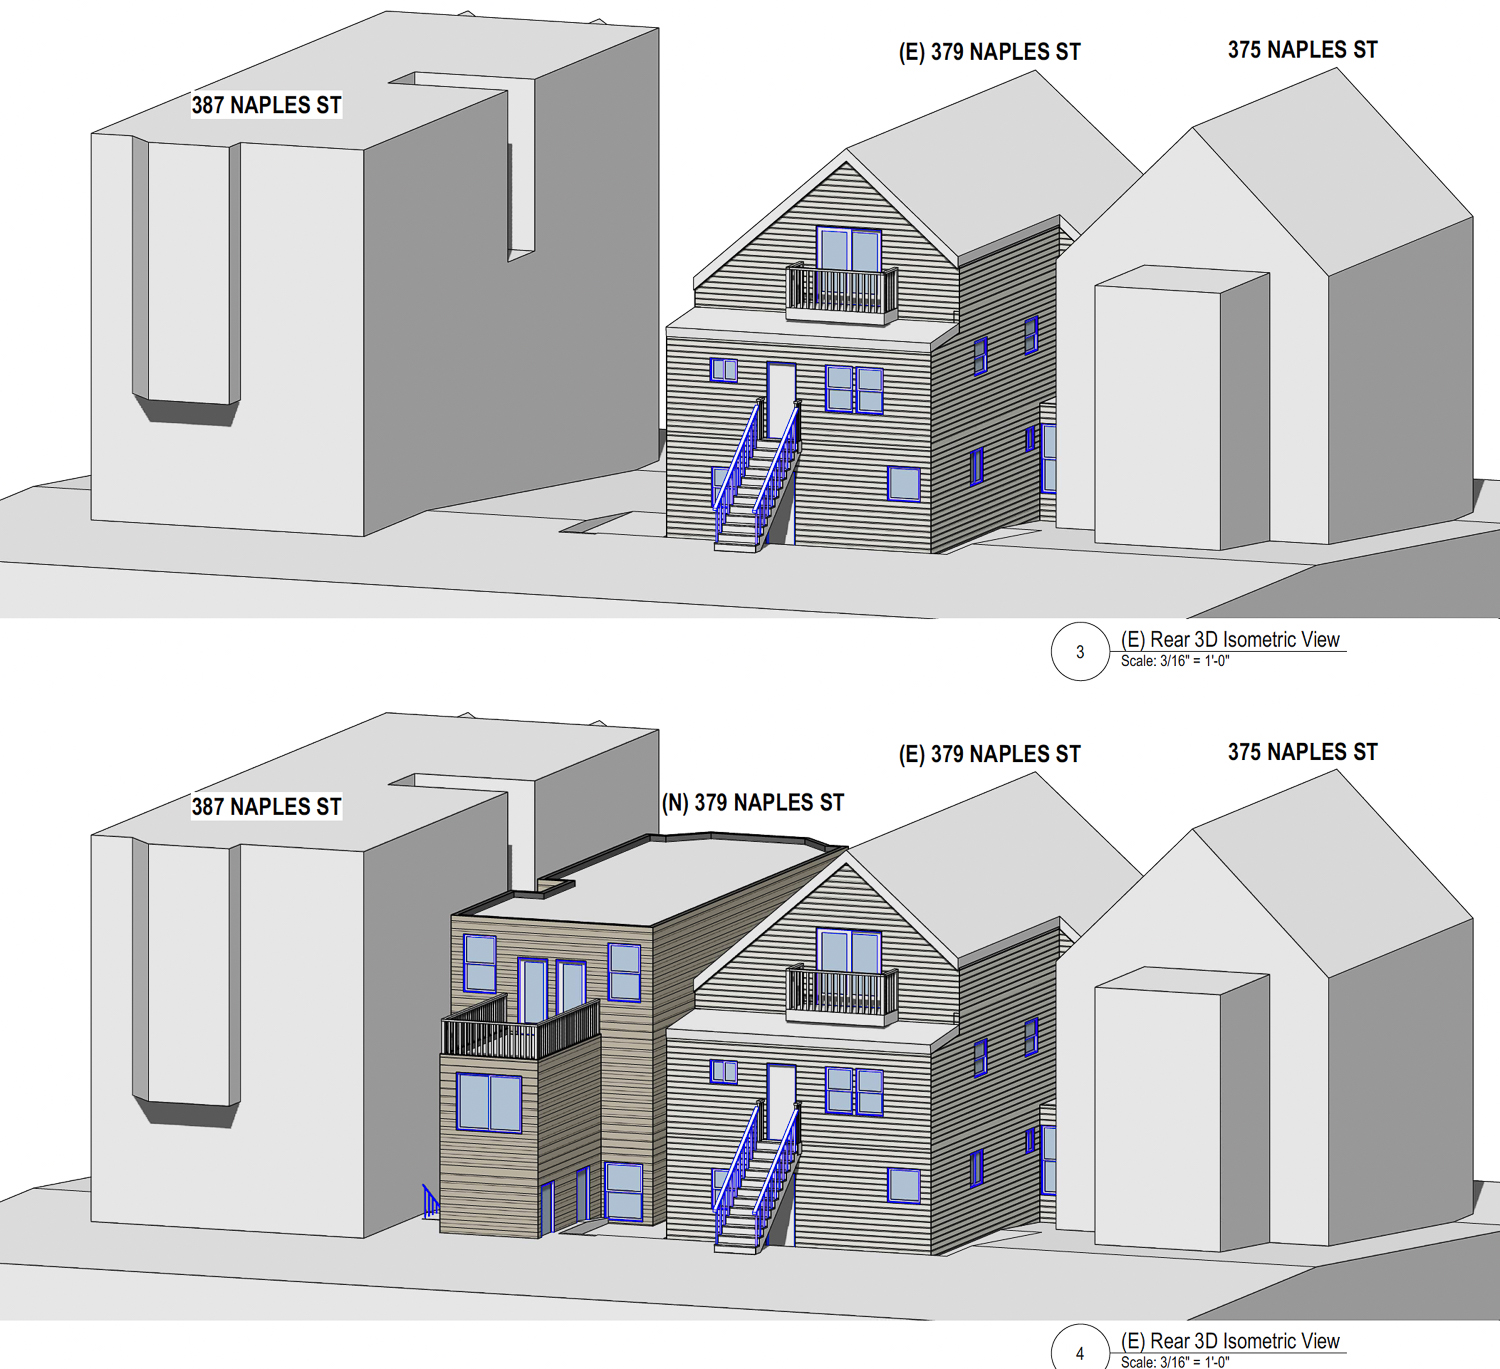 379 Naples Street rear view of the existing condition (above) and proposal (below), illustration by SIA Consulting